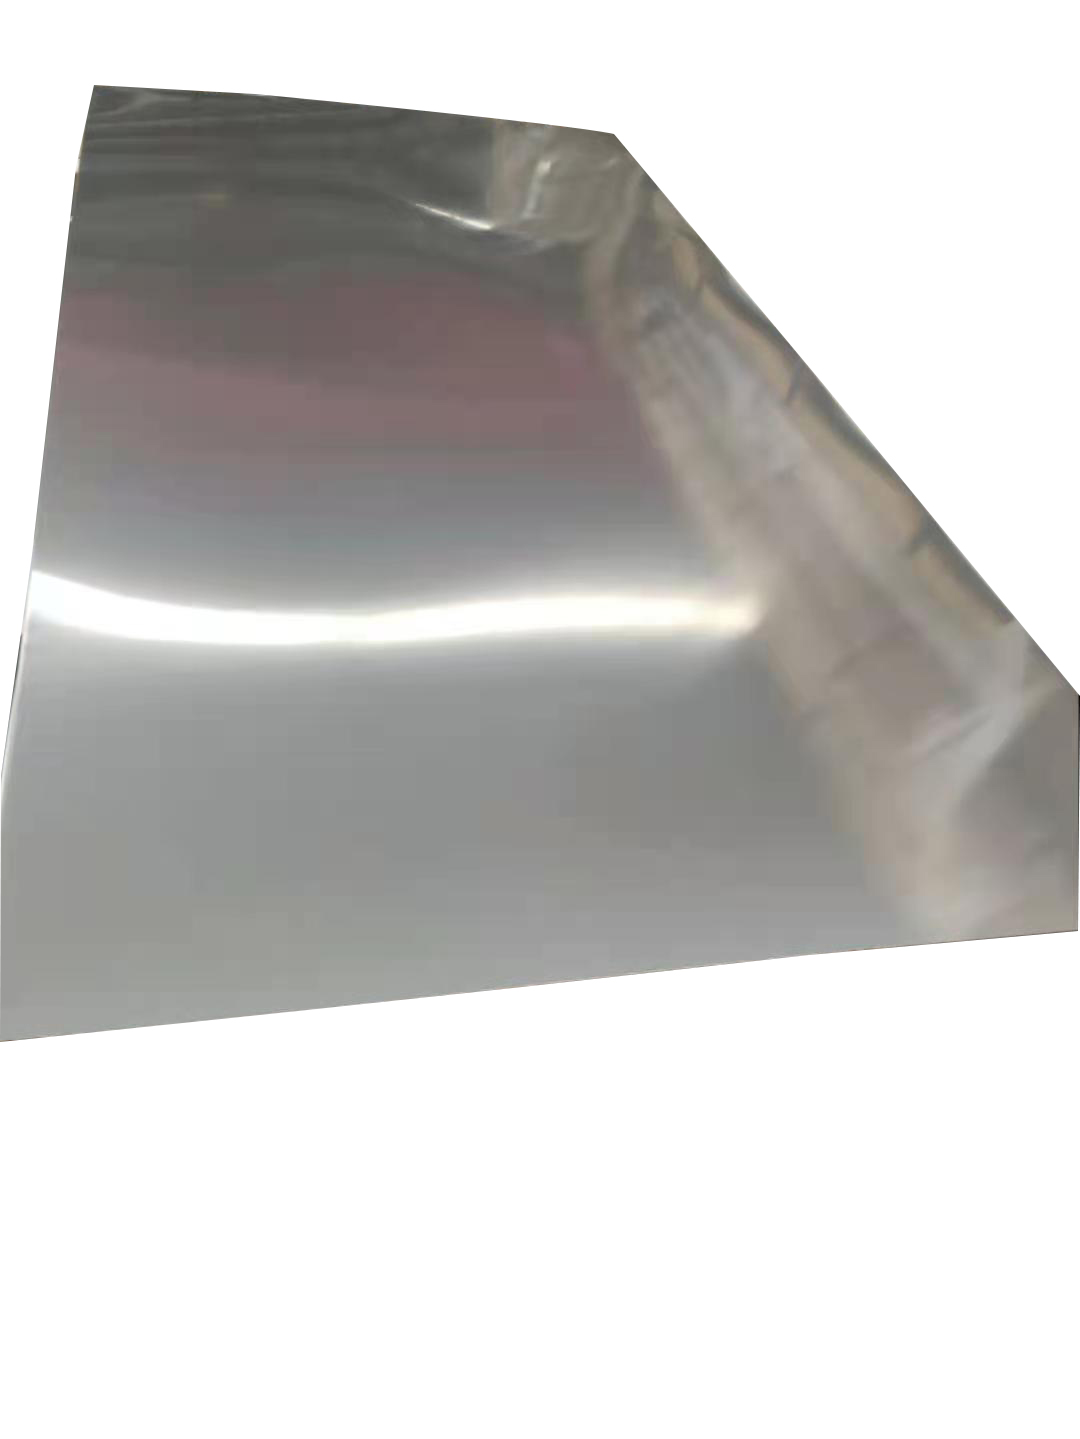 High Quality 201 304 304l 3mm Stainless Steel Sheet with Competitive Price for Sale